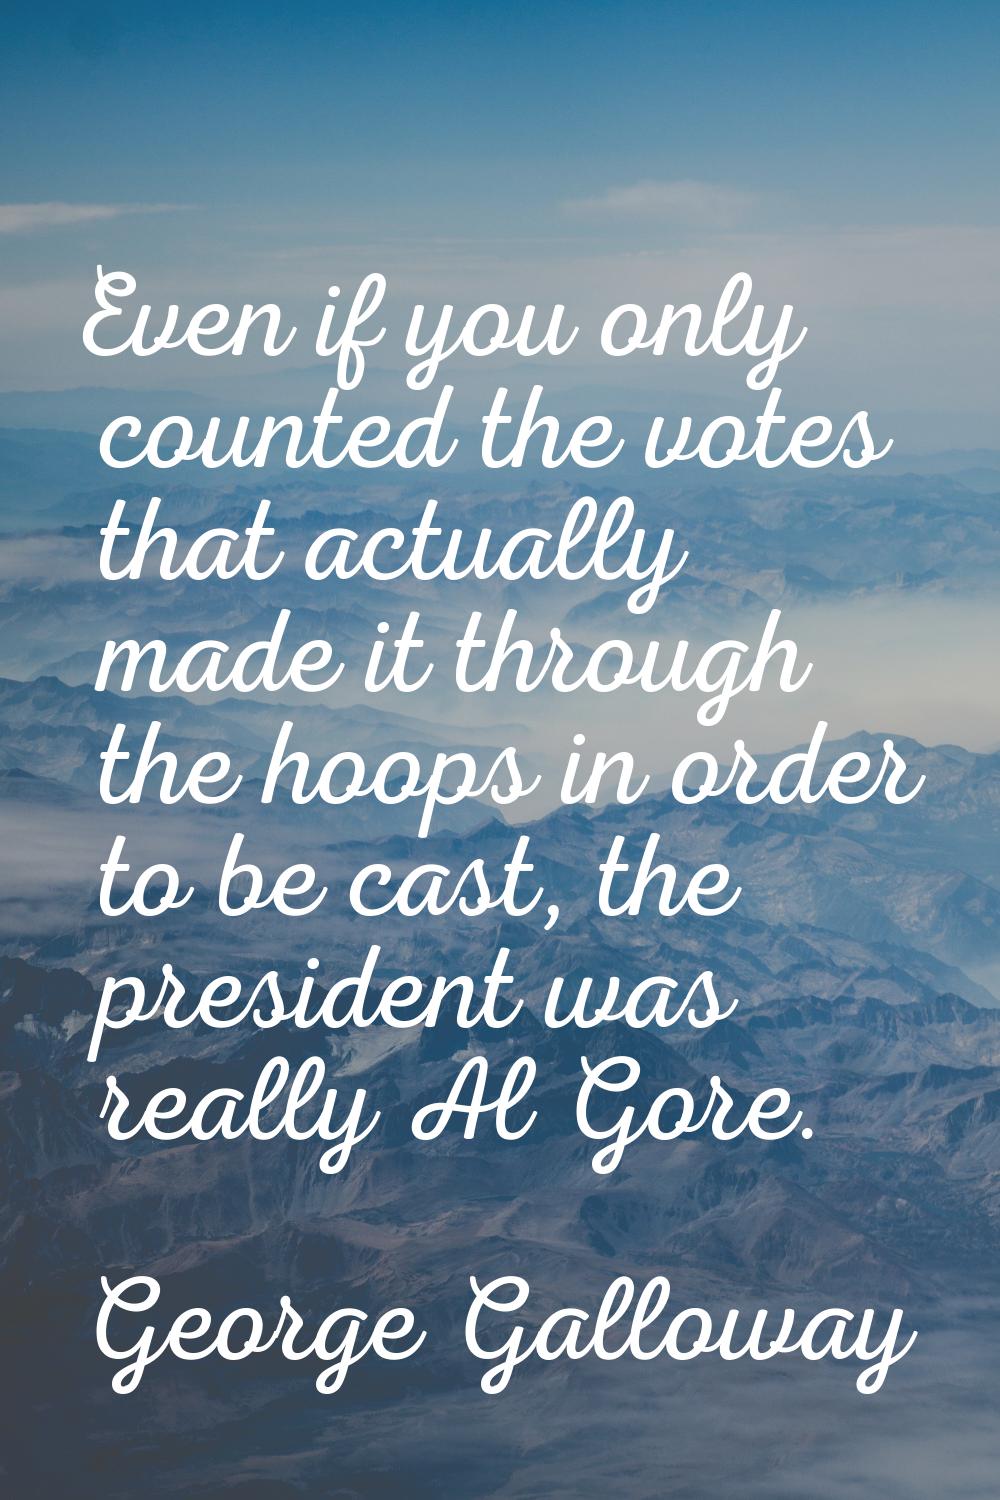 Even if you only counted the votes that actually made it through the hoops in order to be cast, the